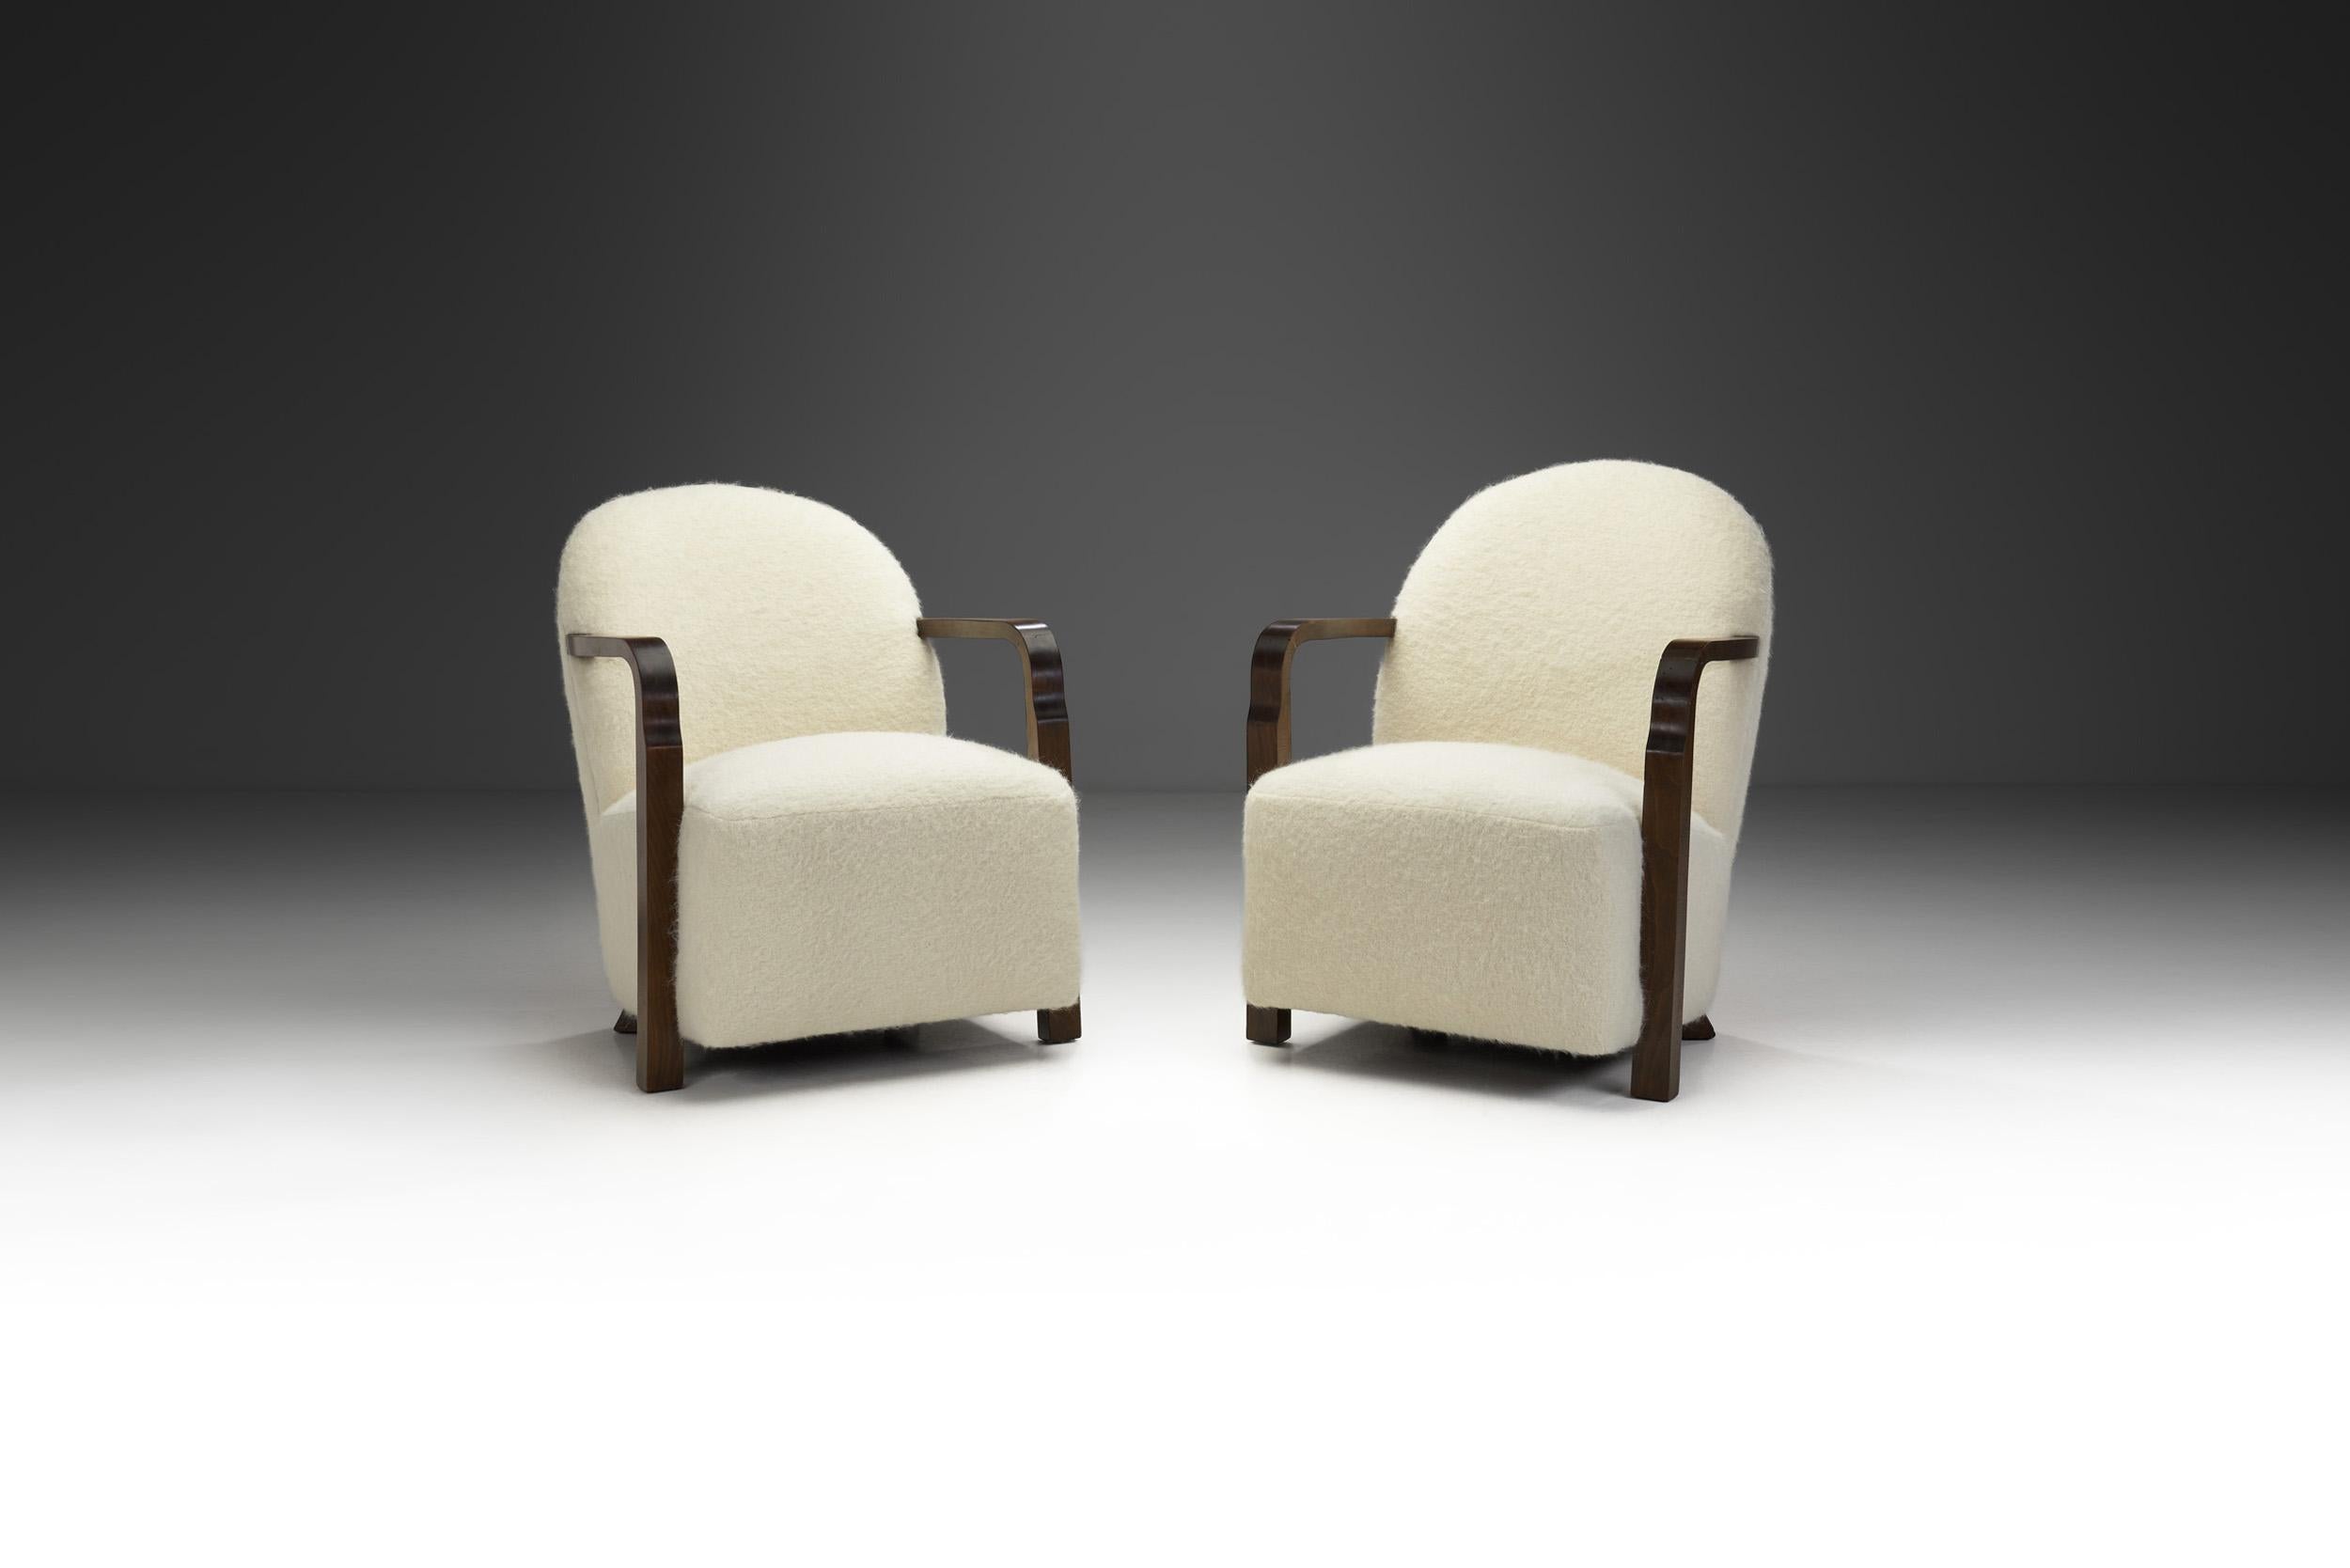 Unsurprisingly, the detailing and glamour of Art Deco married exceptionally well with the simplicity and sleek design of Scandinavia. The result is this pair of chairs: elegance with bold curves with premium materials serving functionality.

As